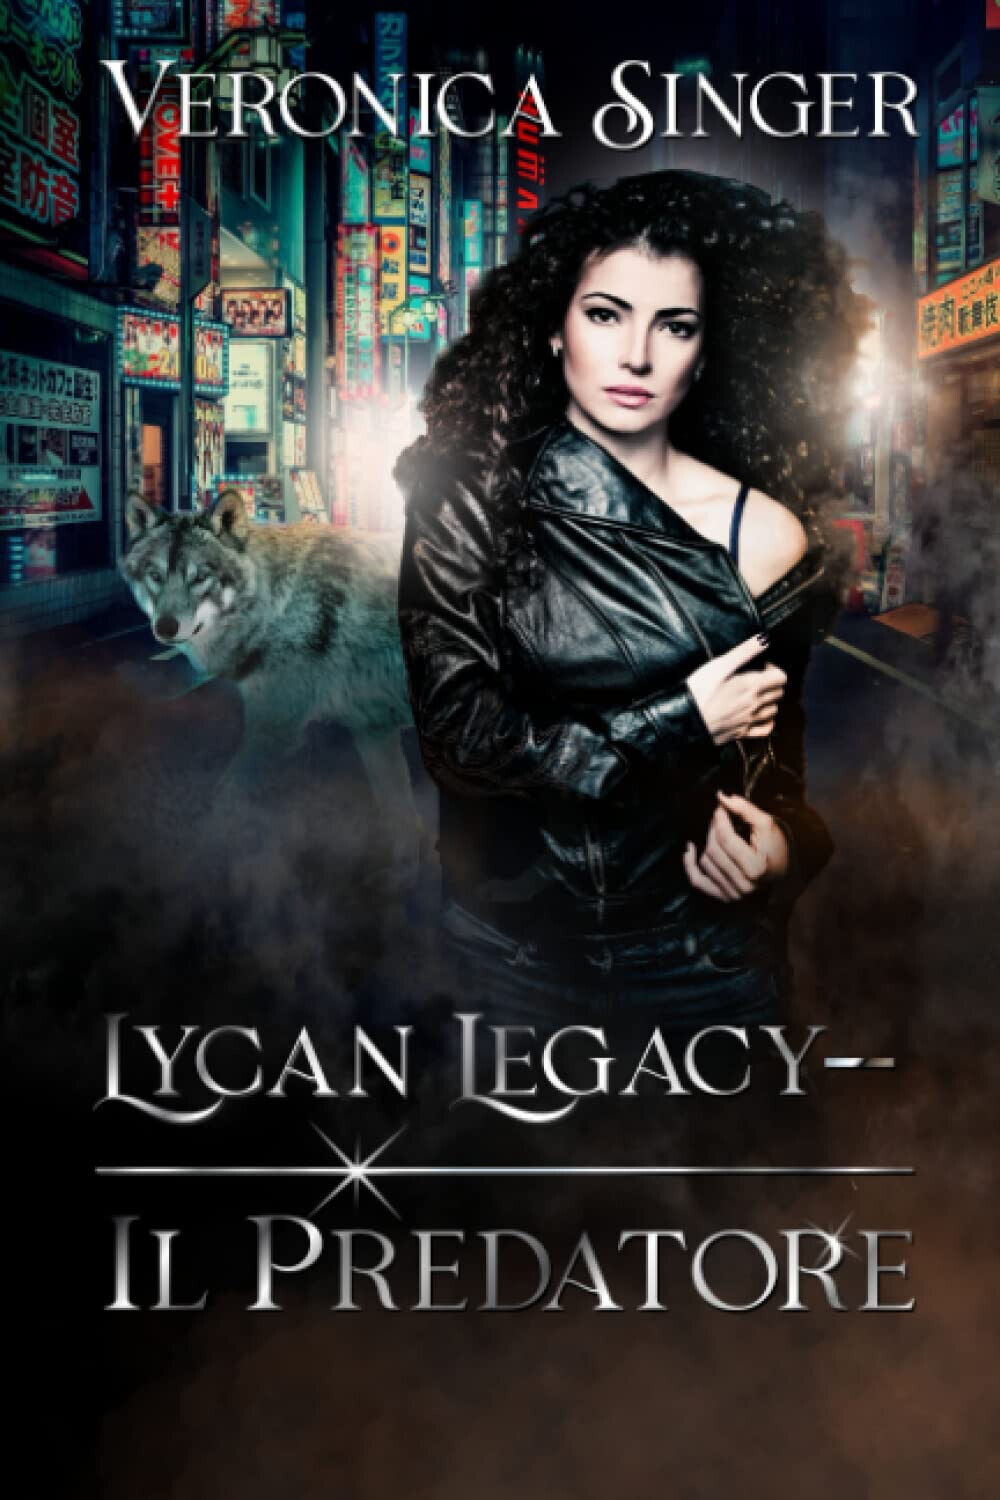 Lycan Legacy - Il Predatore - Veronica Singer - Independently published, 2022